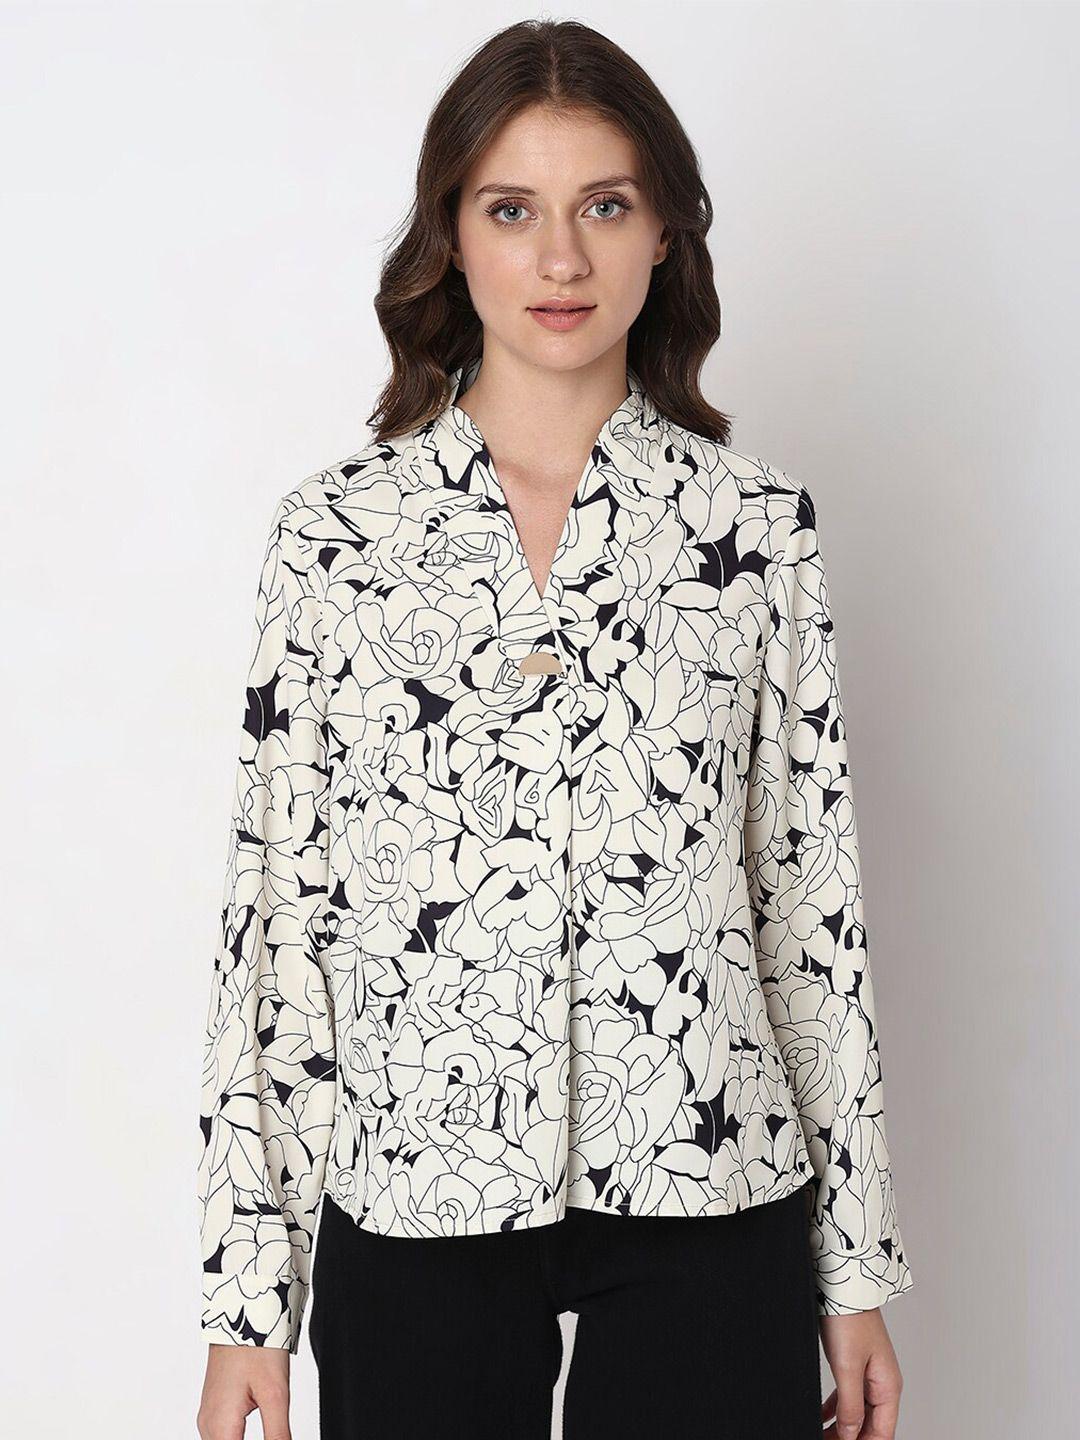 vero moda floral printed cuffed sleeves shirt style top